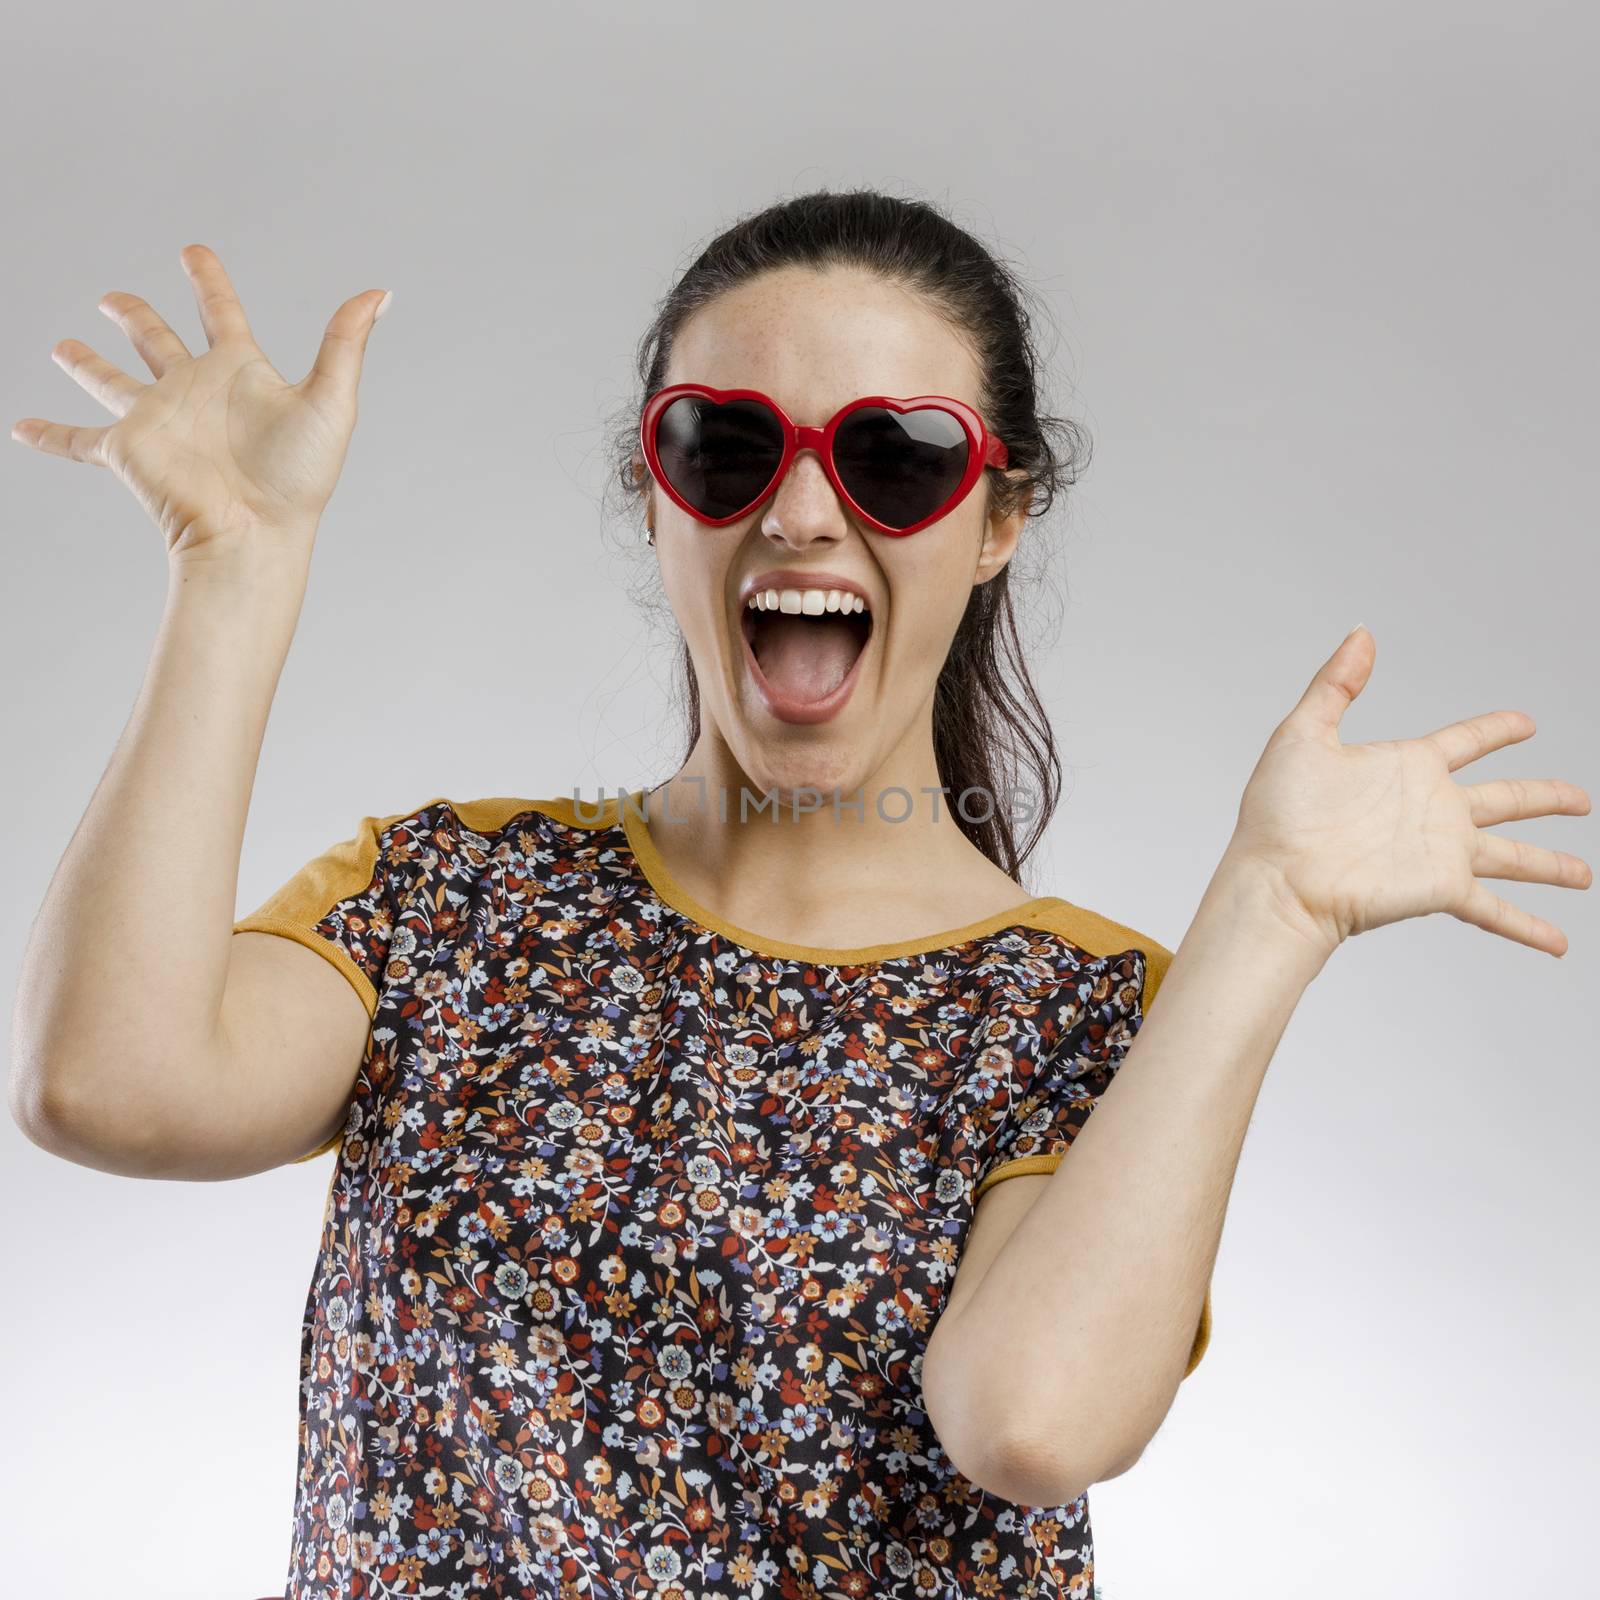 Portrait of a happy woman wearing sunglasses playing and smiling